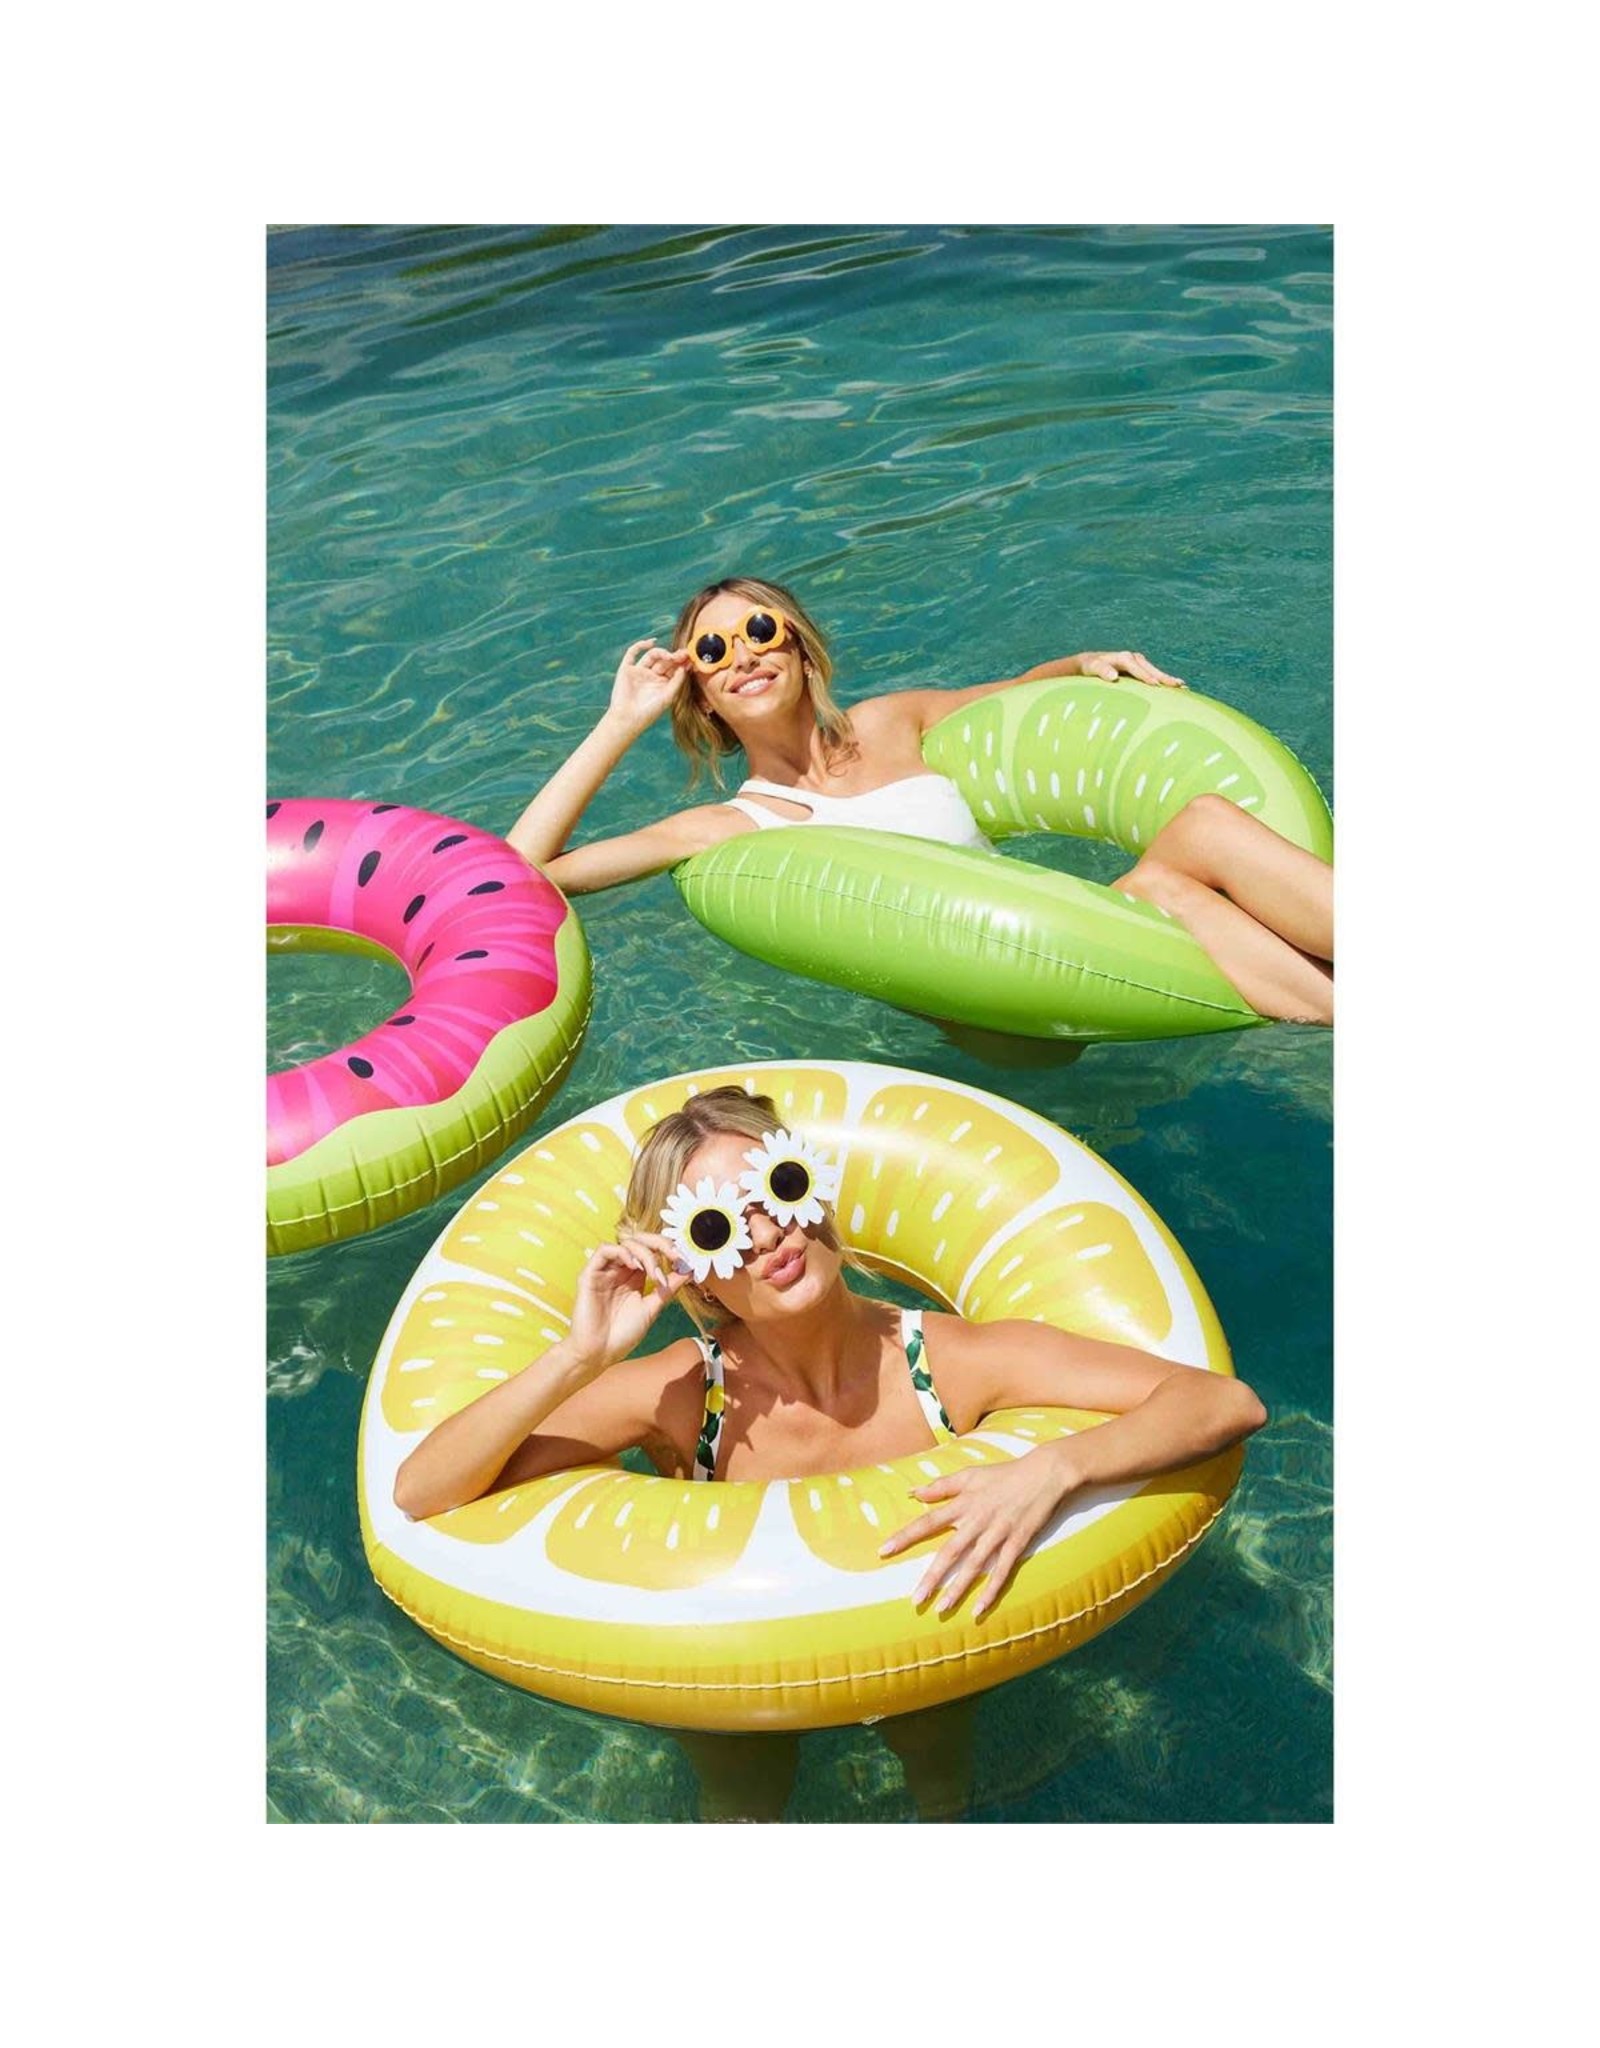 Mud Pie Summer Party Fruit Pool Float Green Lime